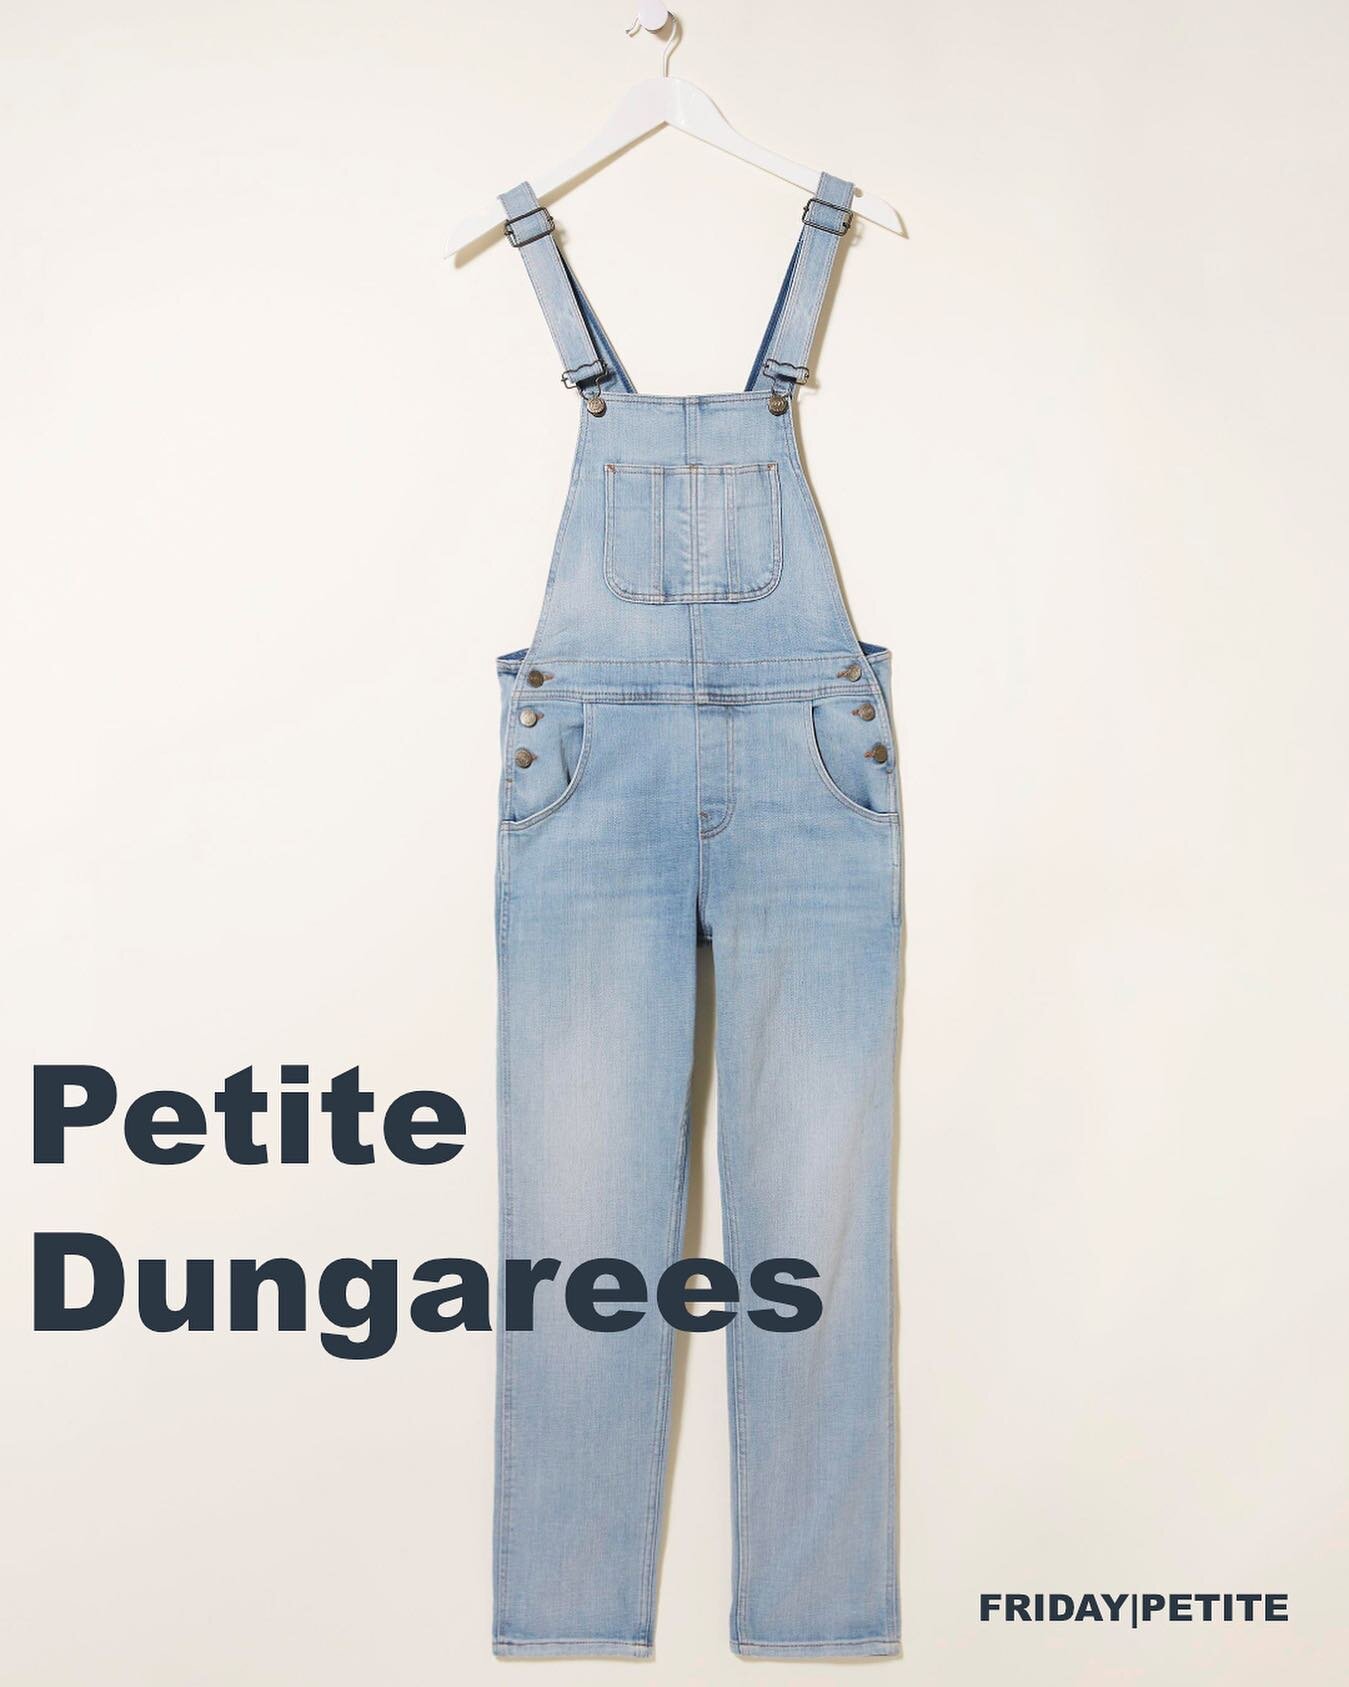 Dungarees are back for spring and we&rsquo;re really not mad about it! We&rsquo;ve rounded up our favourite petite styles for your viewing pleasure. Link 🔗 in bio to check them all out.
.
.
.
.
#petitestyle #petitefashion #dungarees #petitedungarees